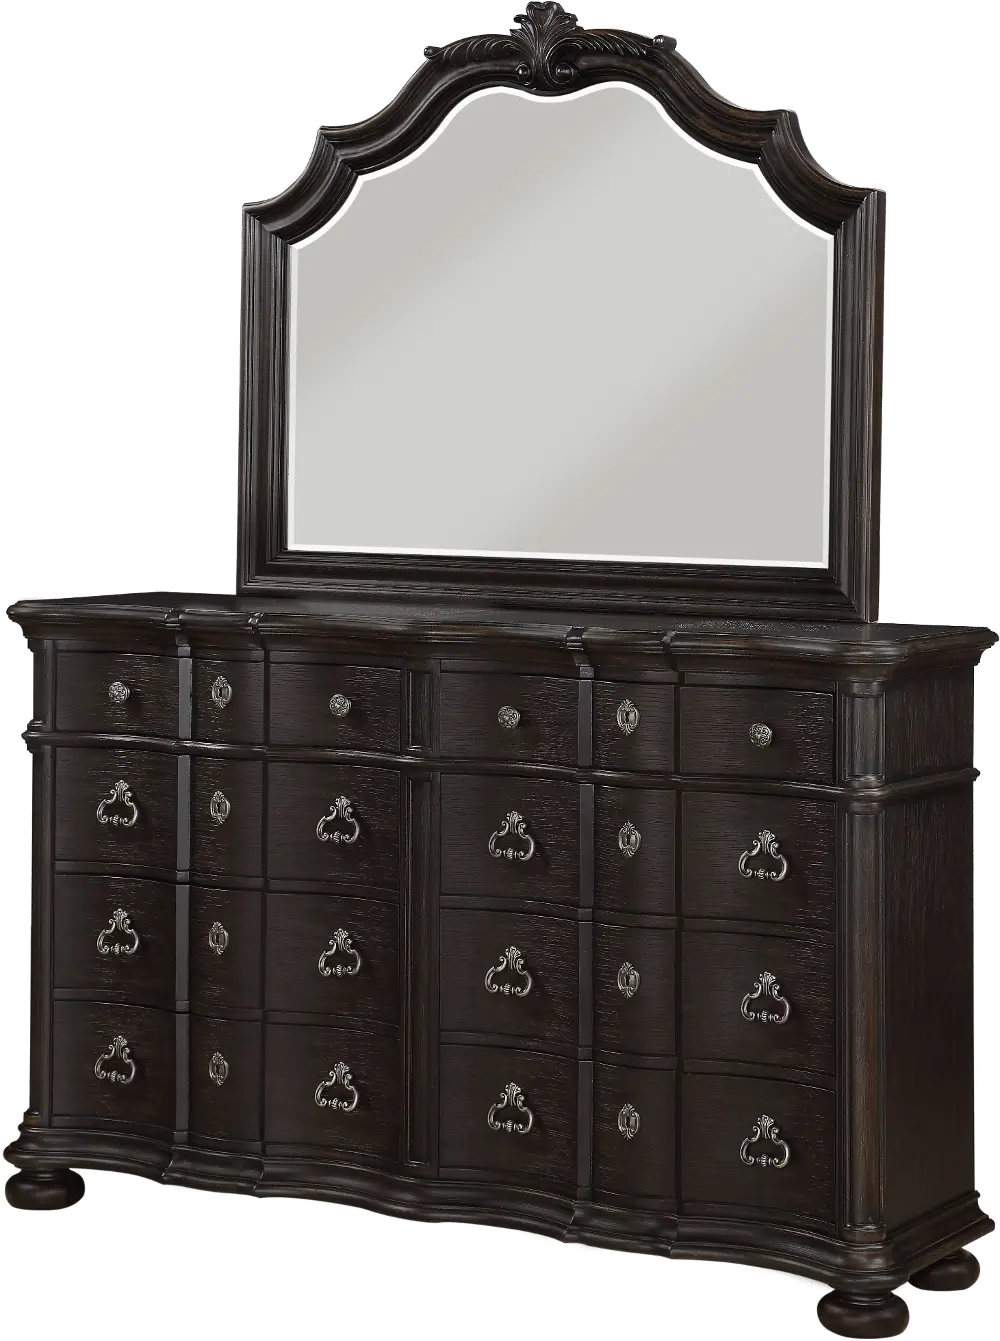 Coffee Bean Dresser - Private Moments Collection-1